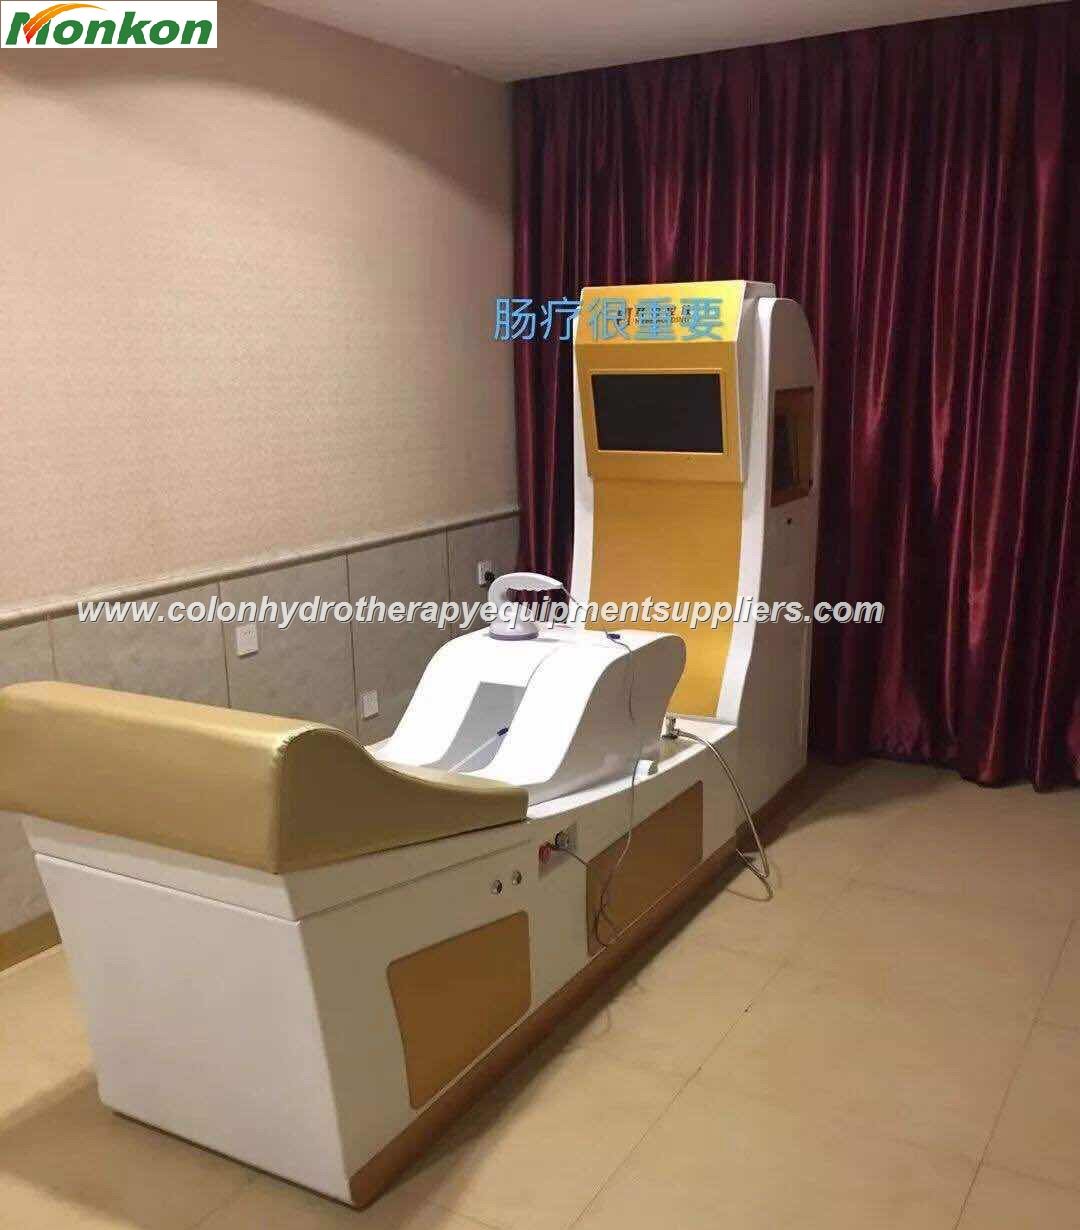 Colon Hydrotherapy Equipment Suppliers